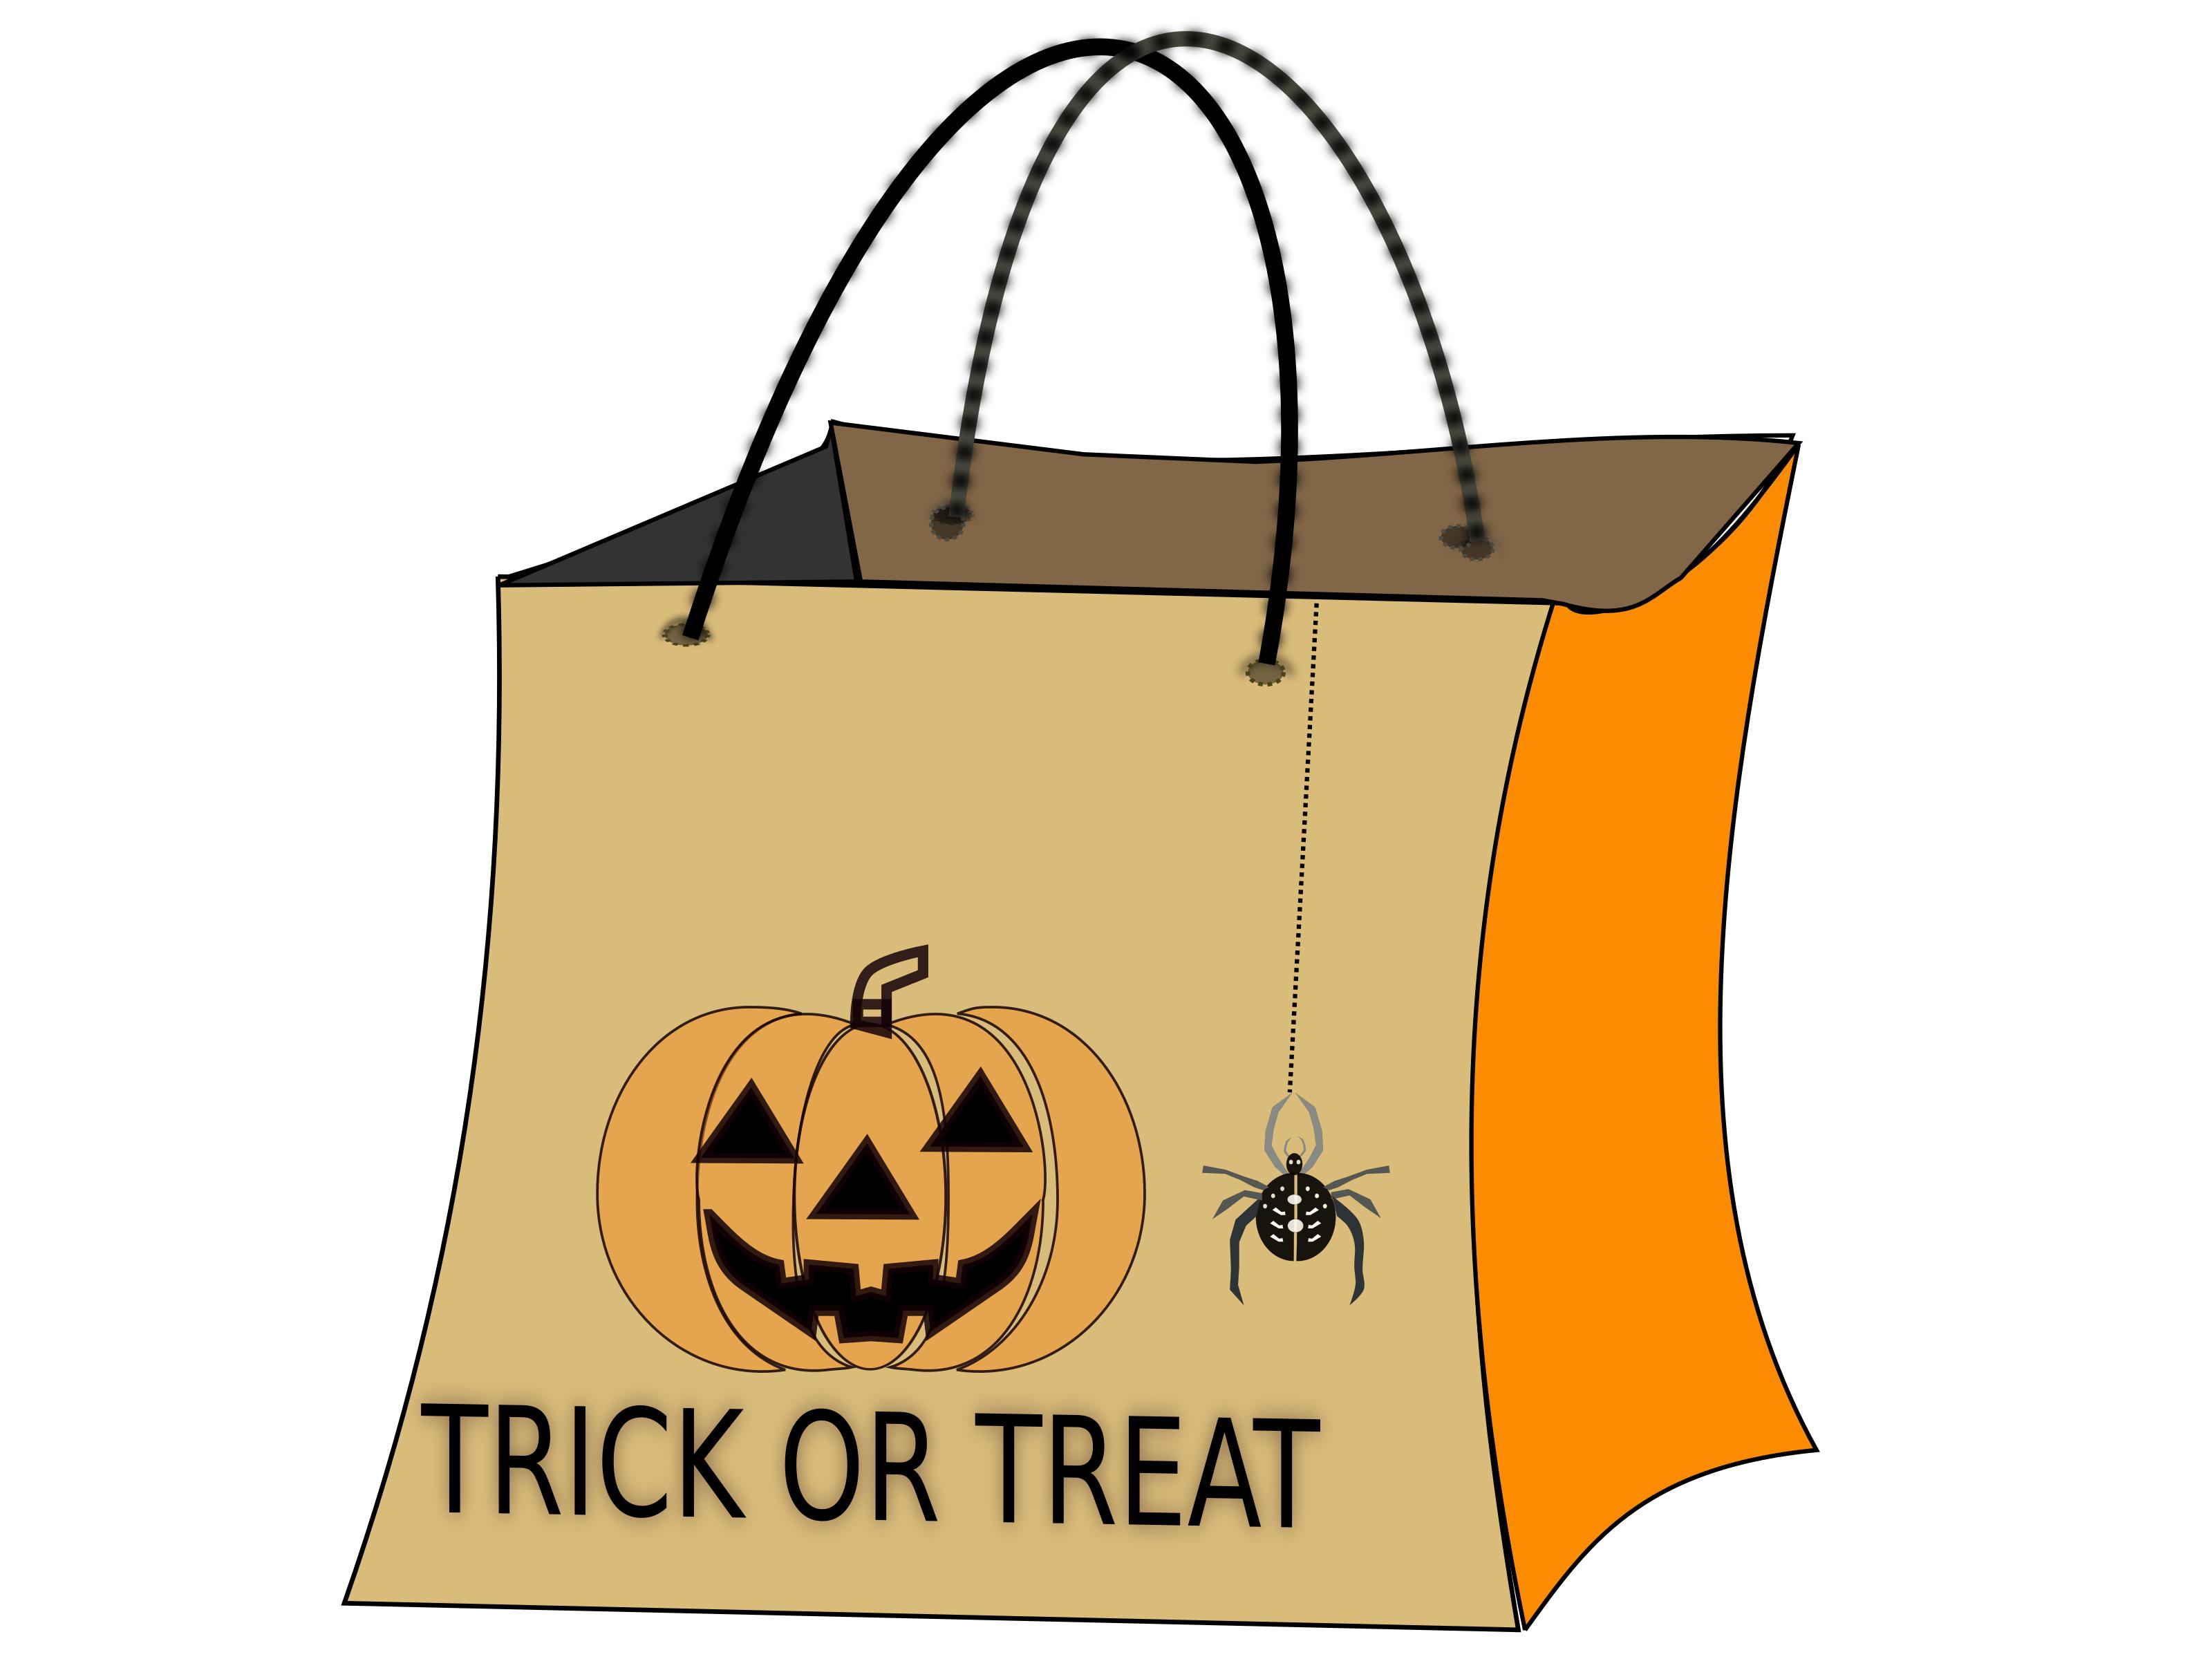 TRICK OR TREAT BAG icons